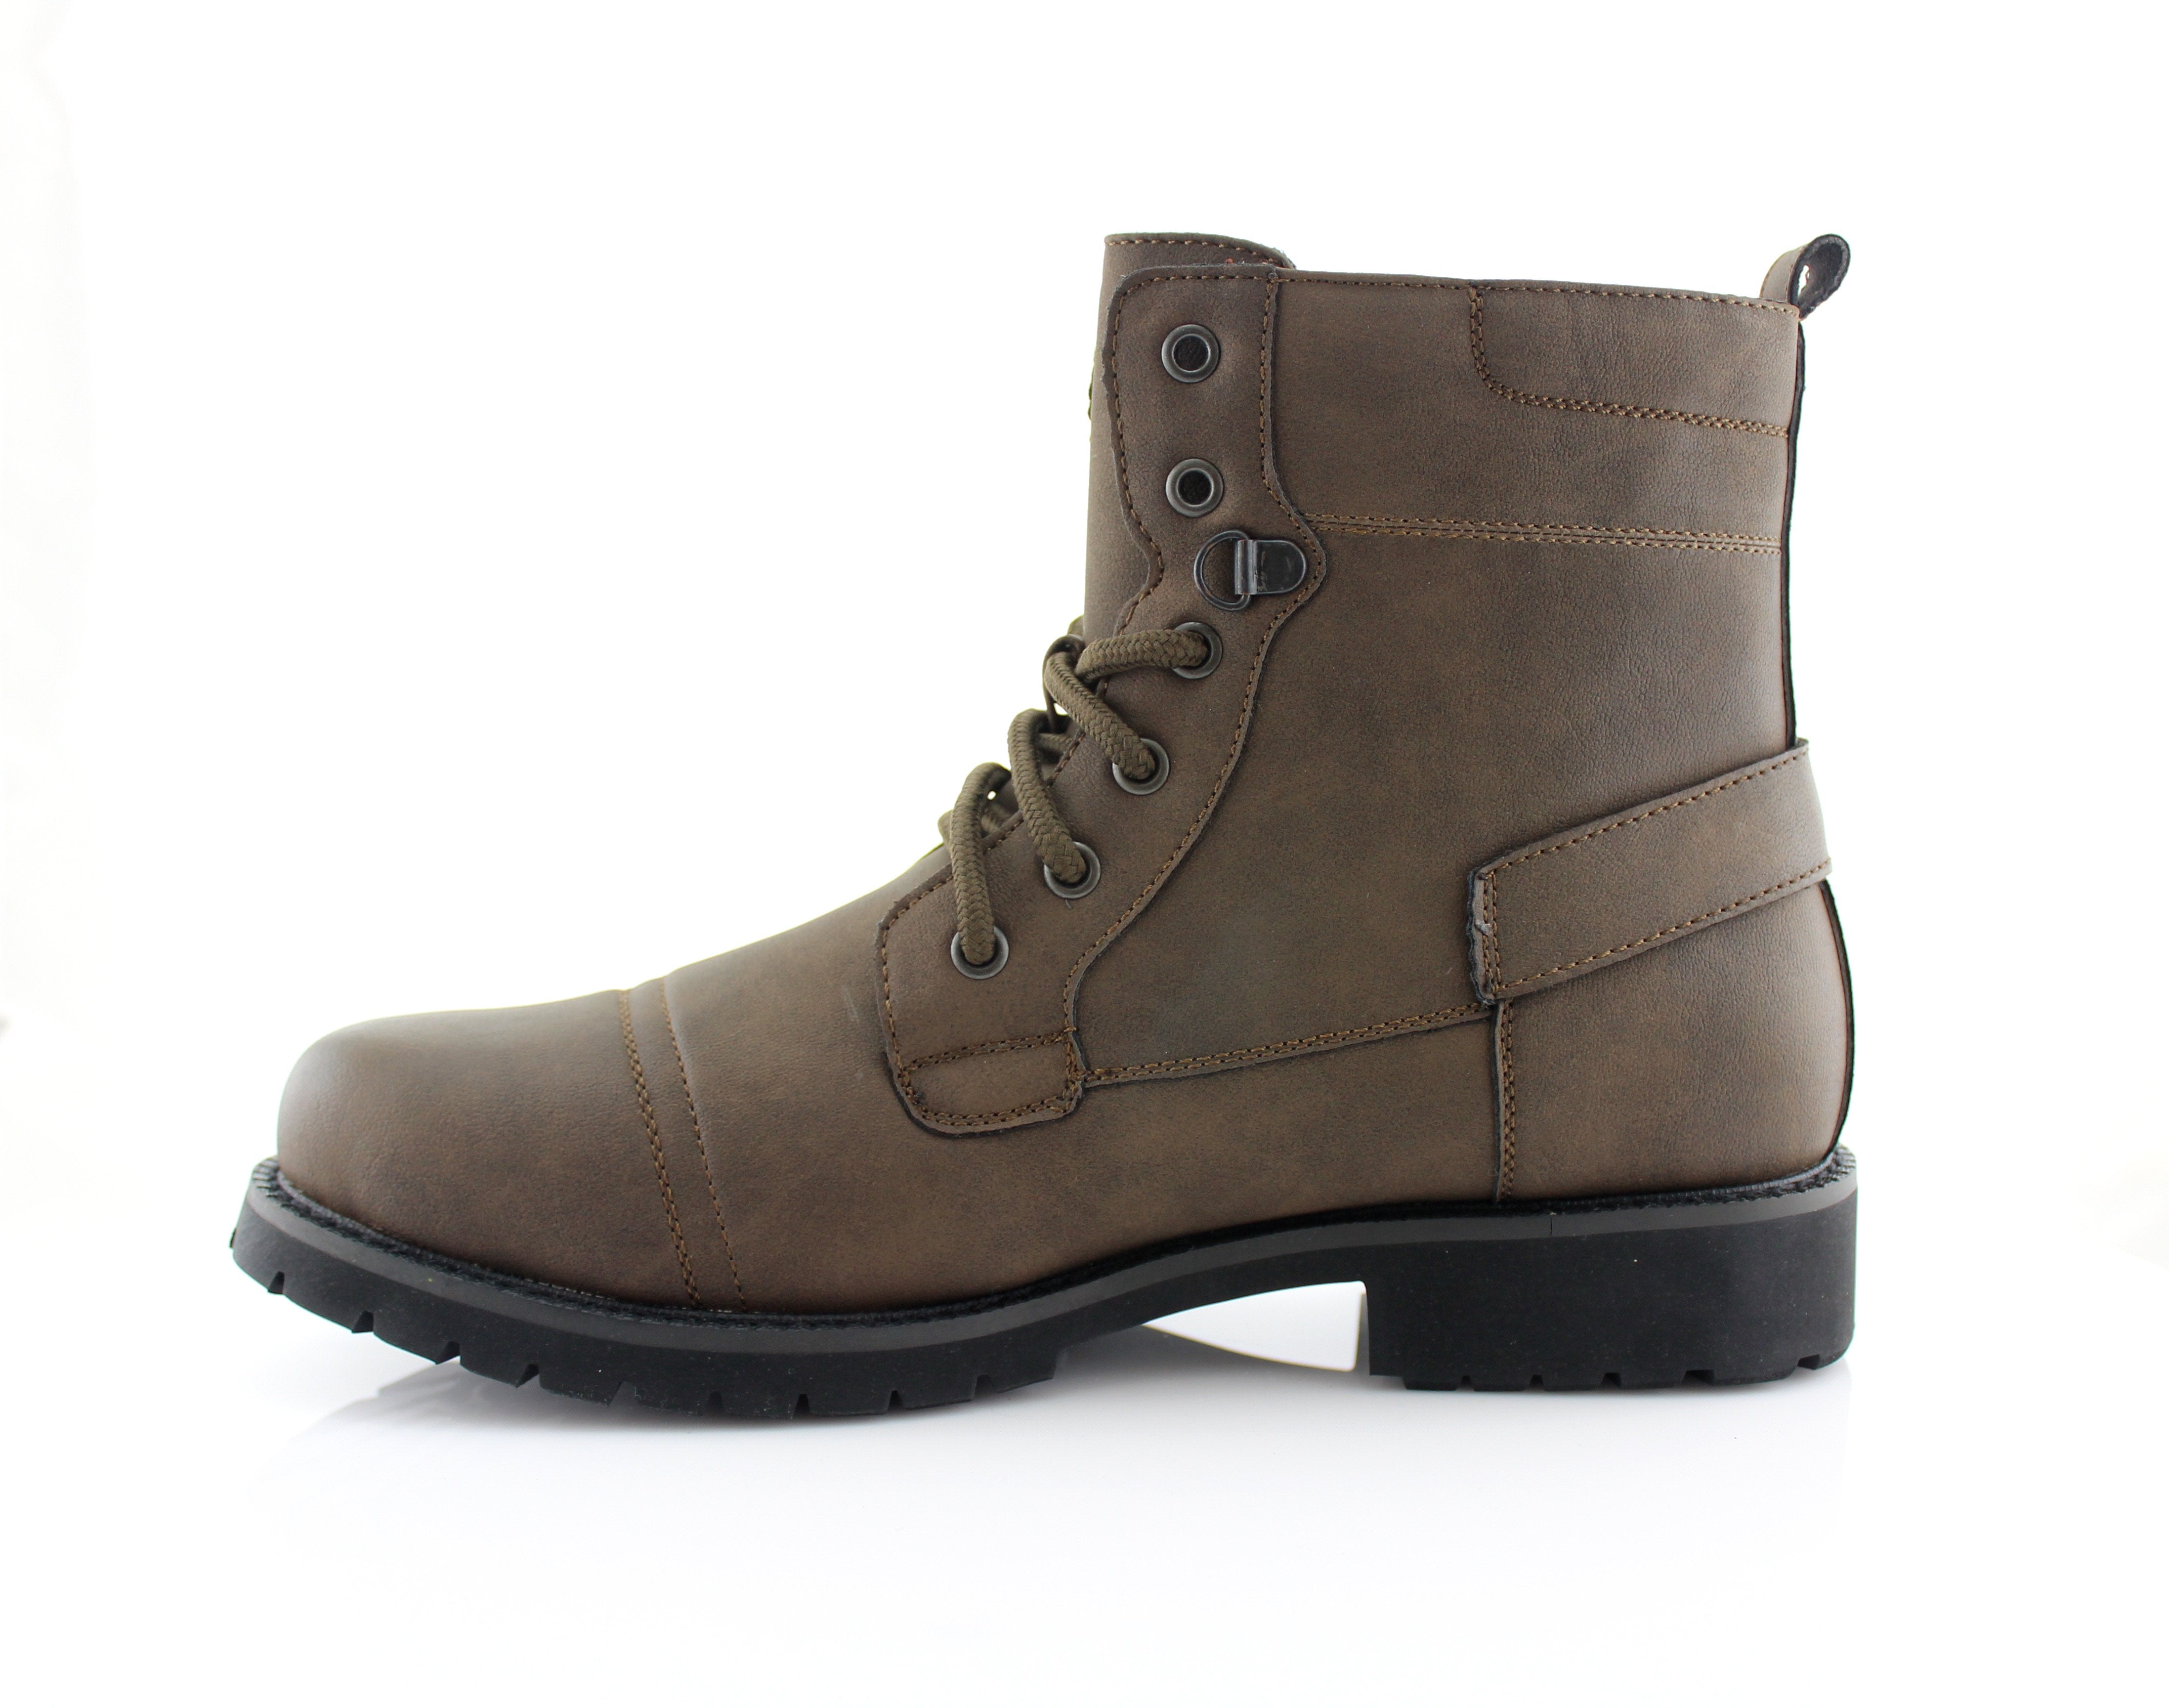 Rugged Inner Mesh Boots | Fabian by Polar Fox | Conal Footwear | Inner Side Angle View